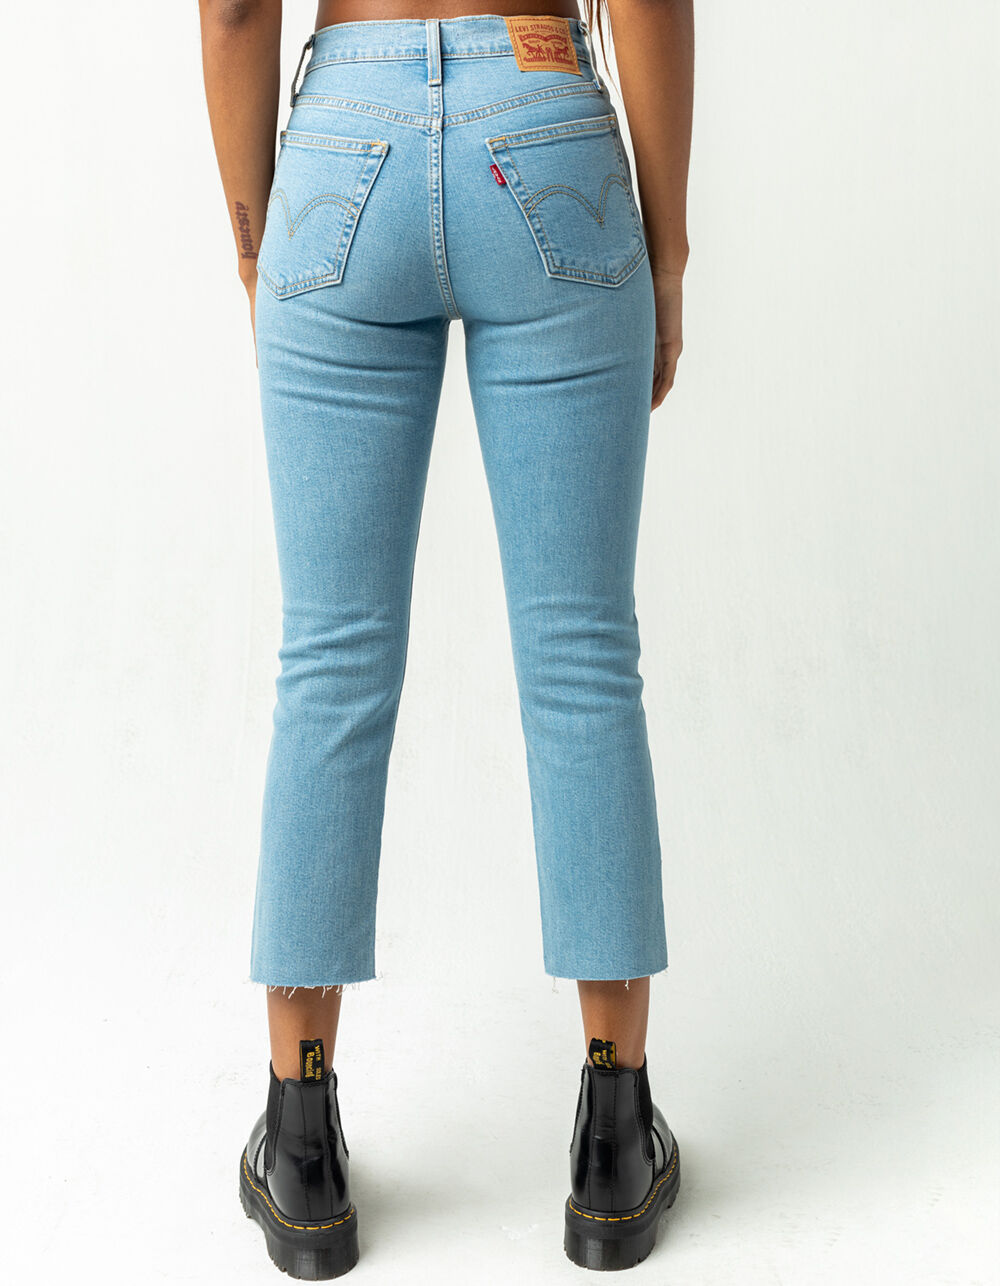 LEVI'S Wedgie Straight Womens Jeans - LIGHT WASH | Tillys